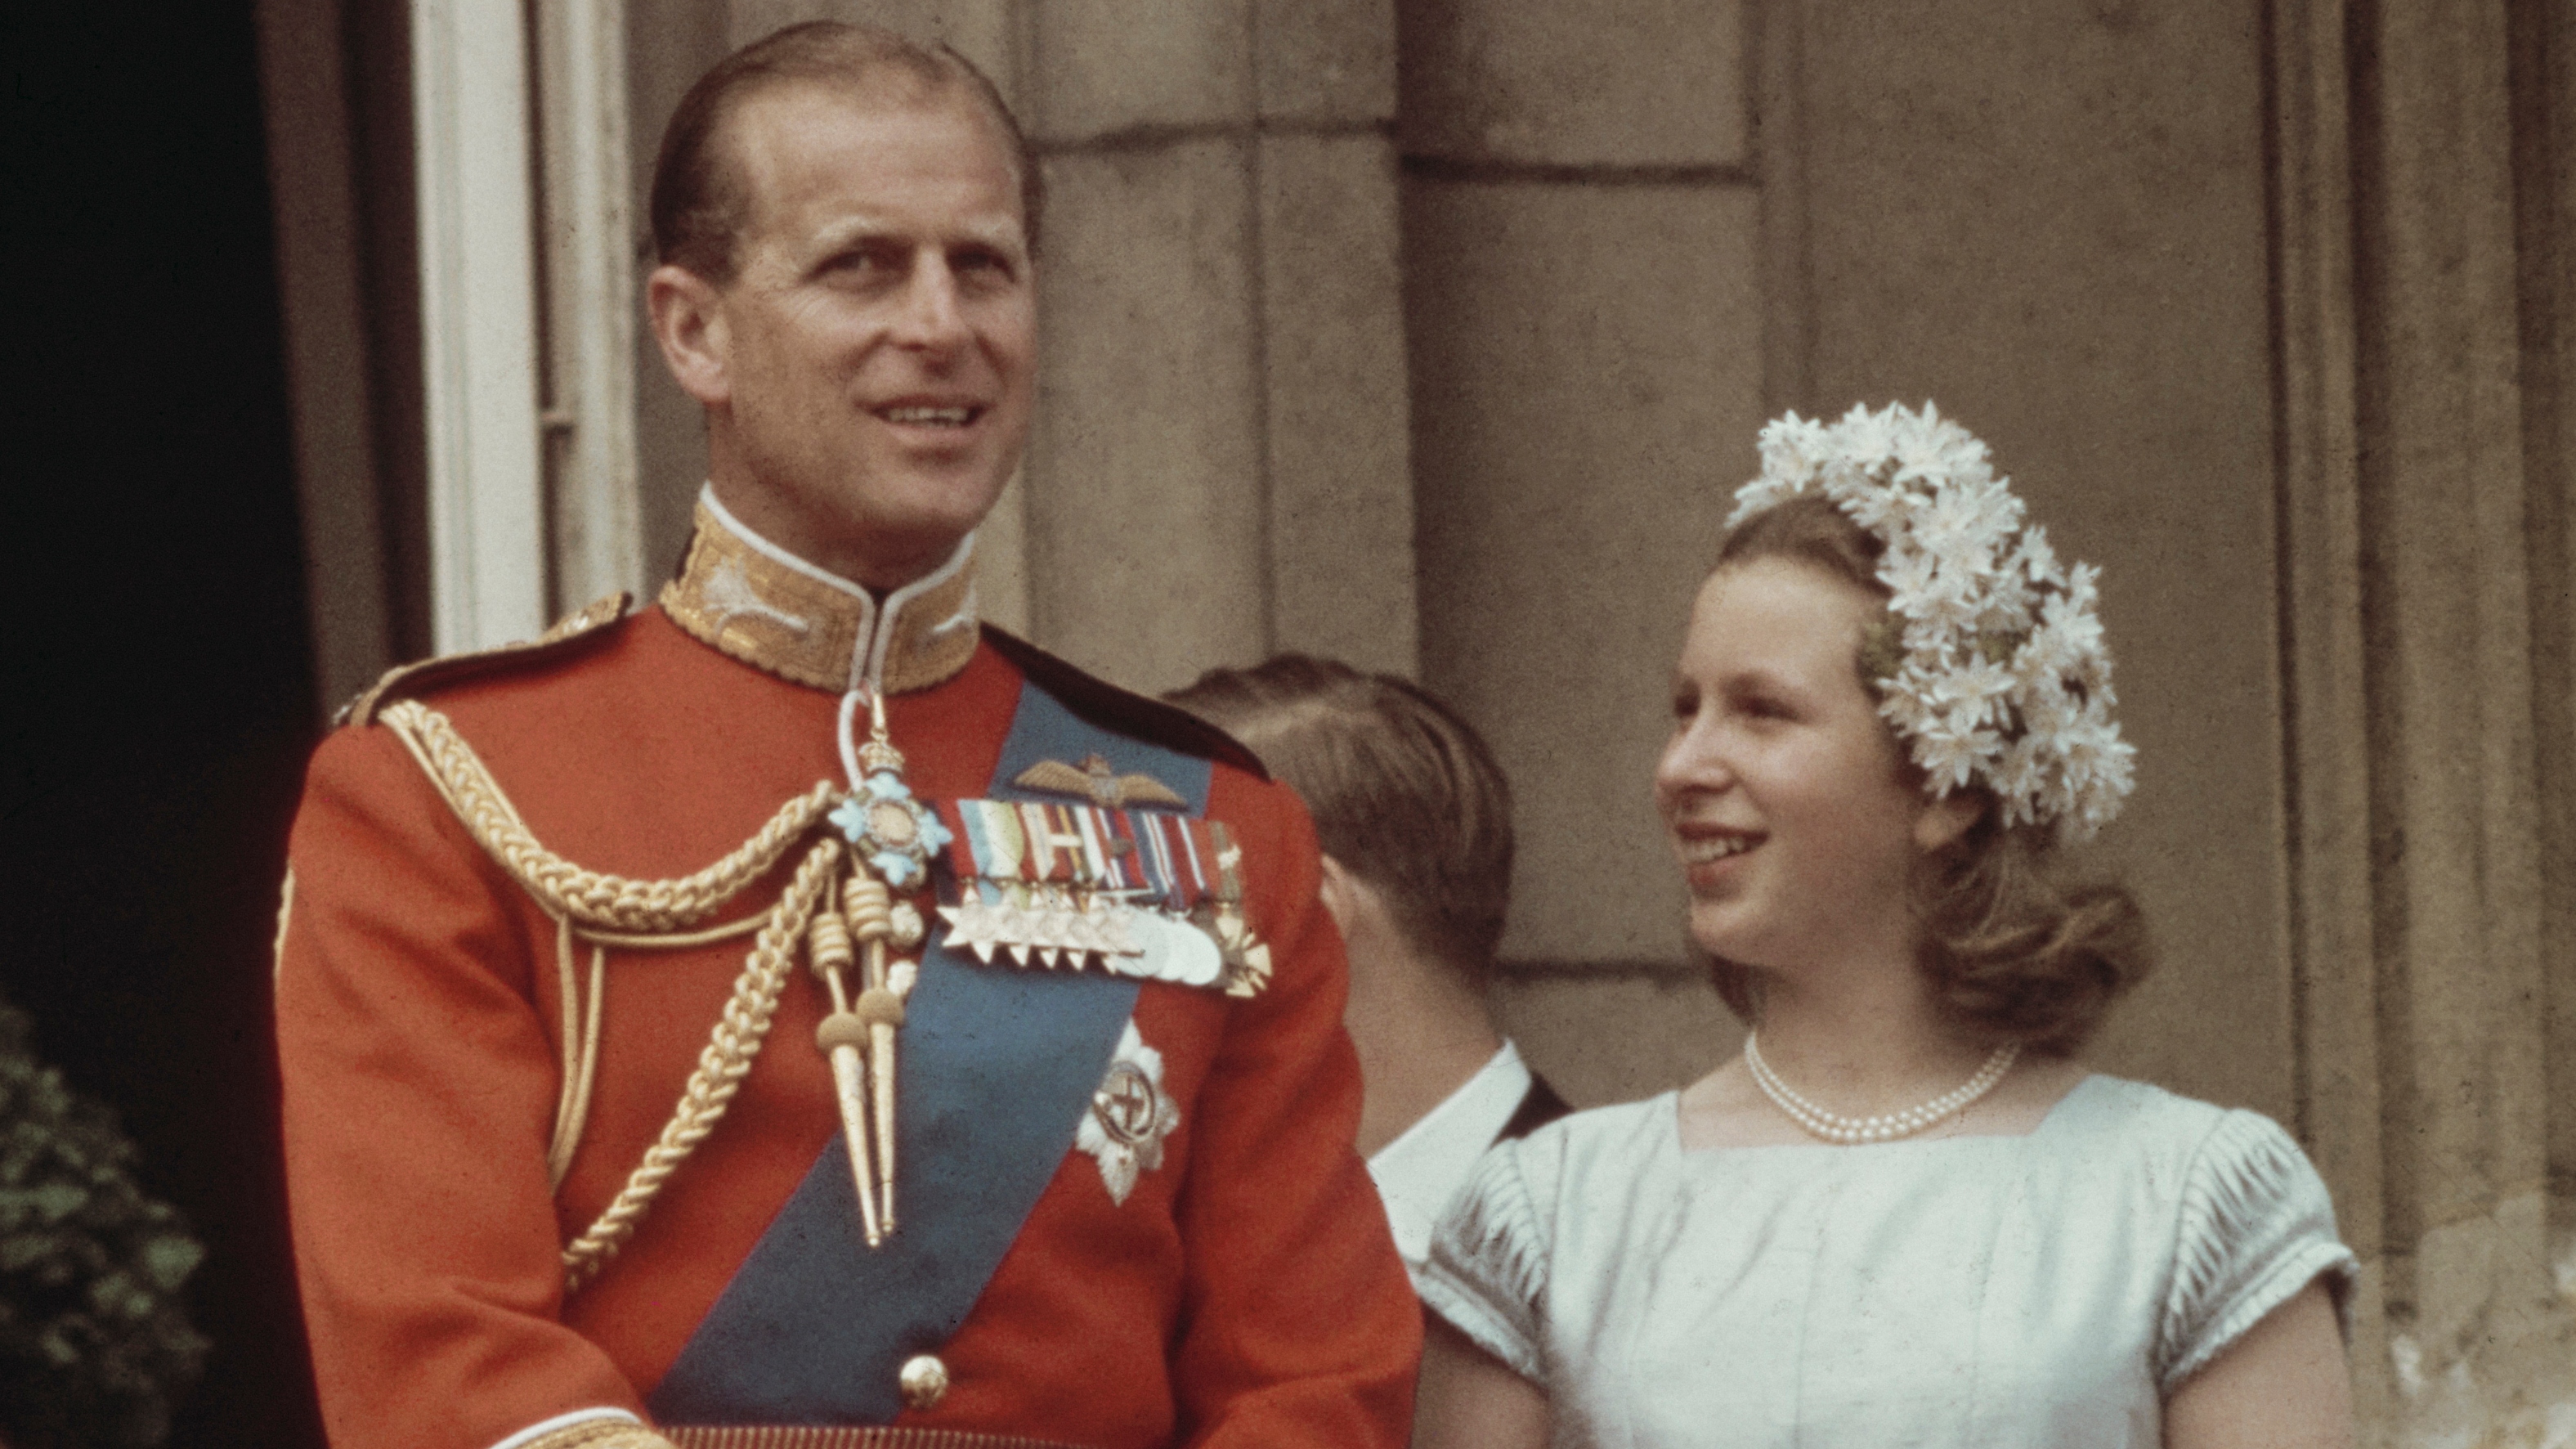 Prince Philip wearing the uniform of the Colonel of the Grenadier Guards, alongside his daughter, Princess Anne